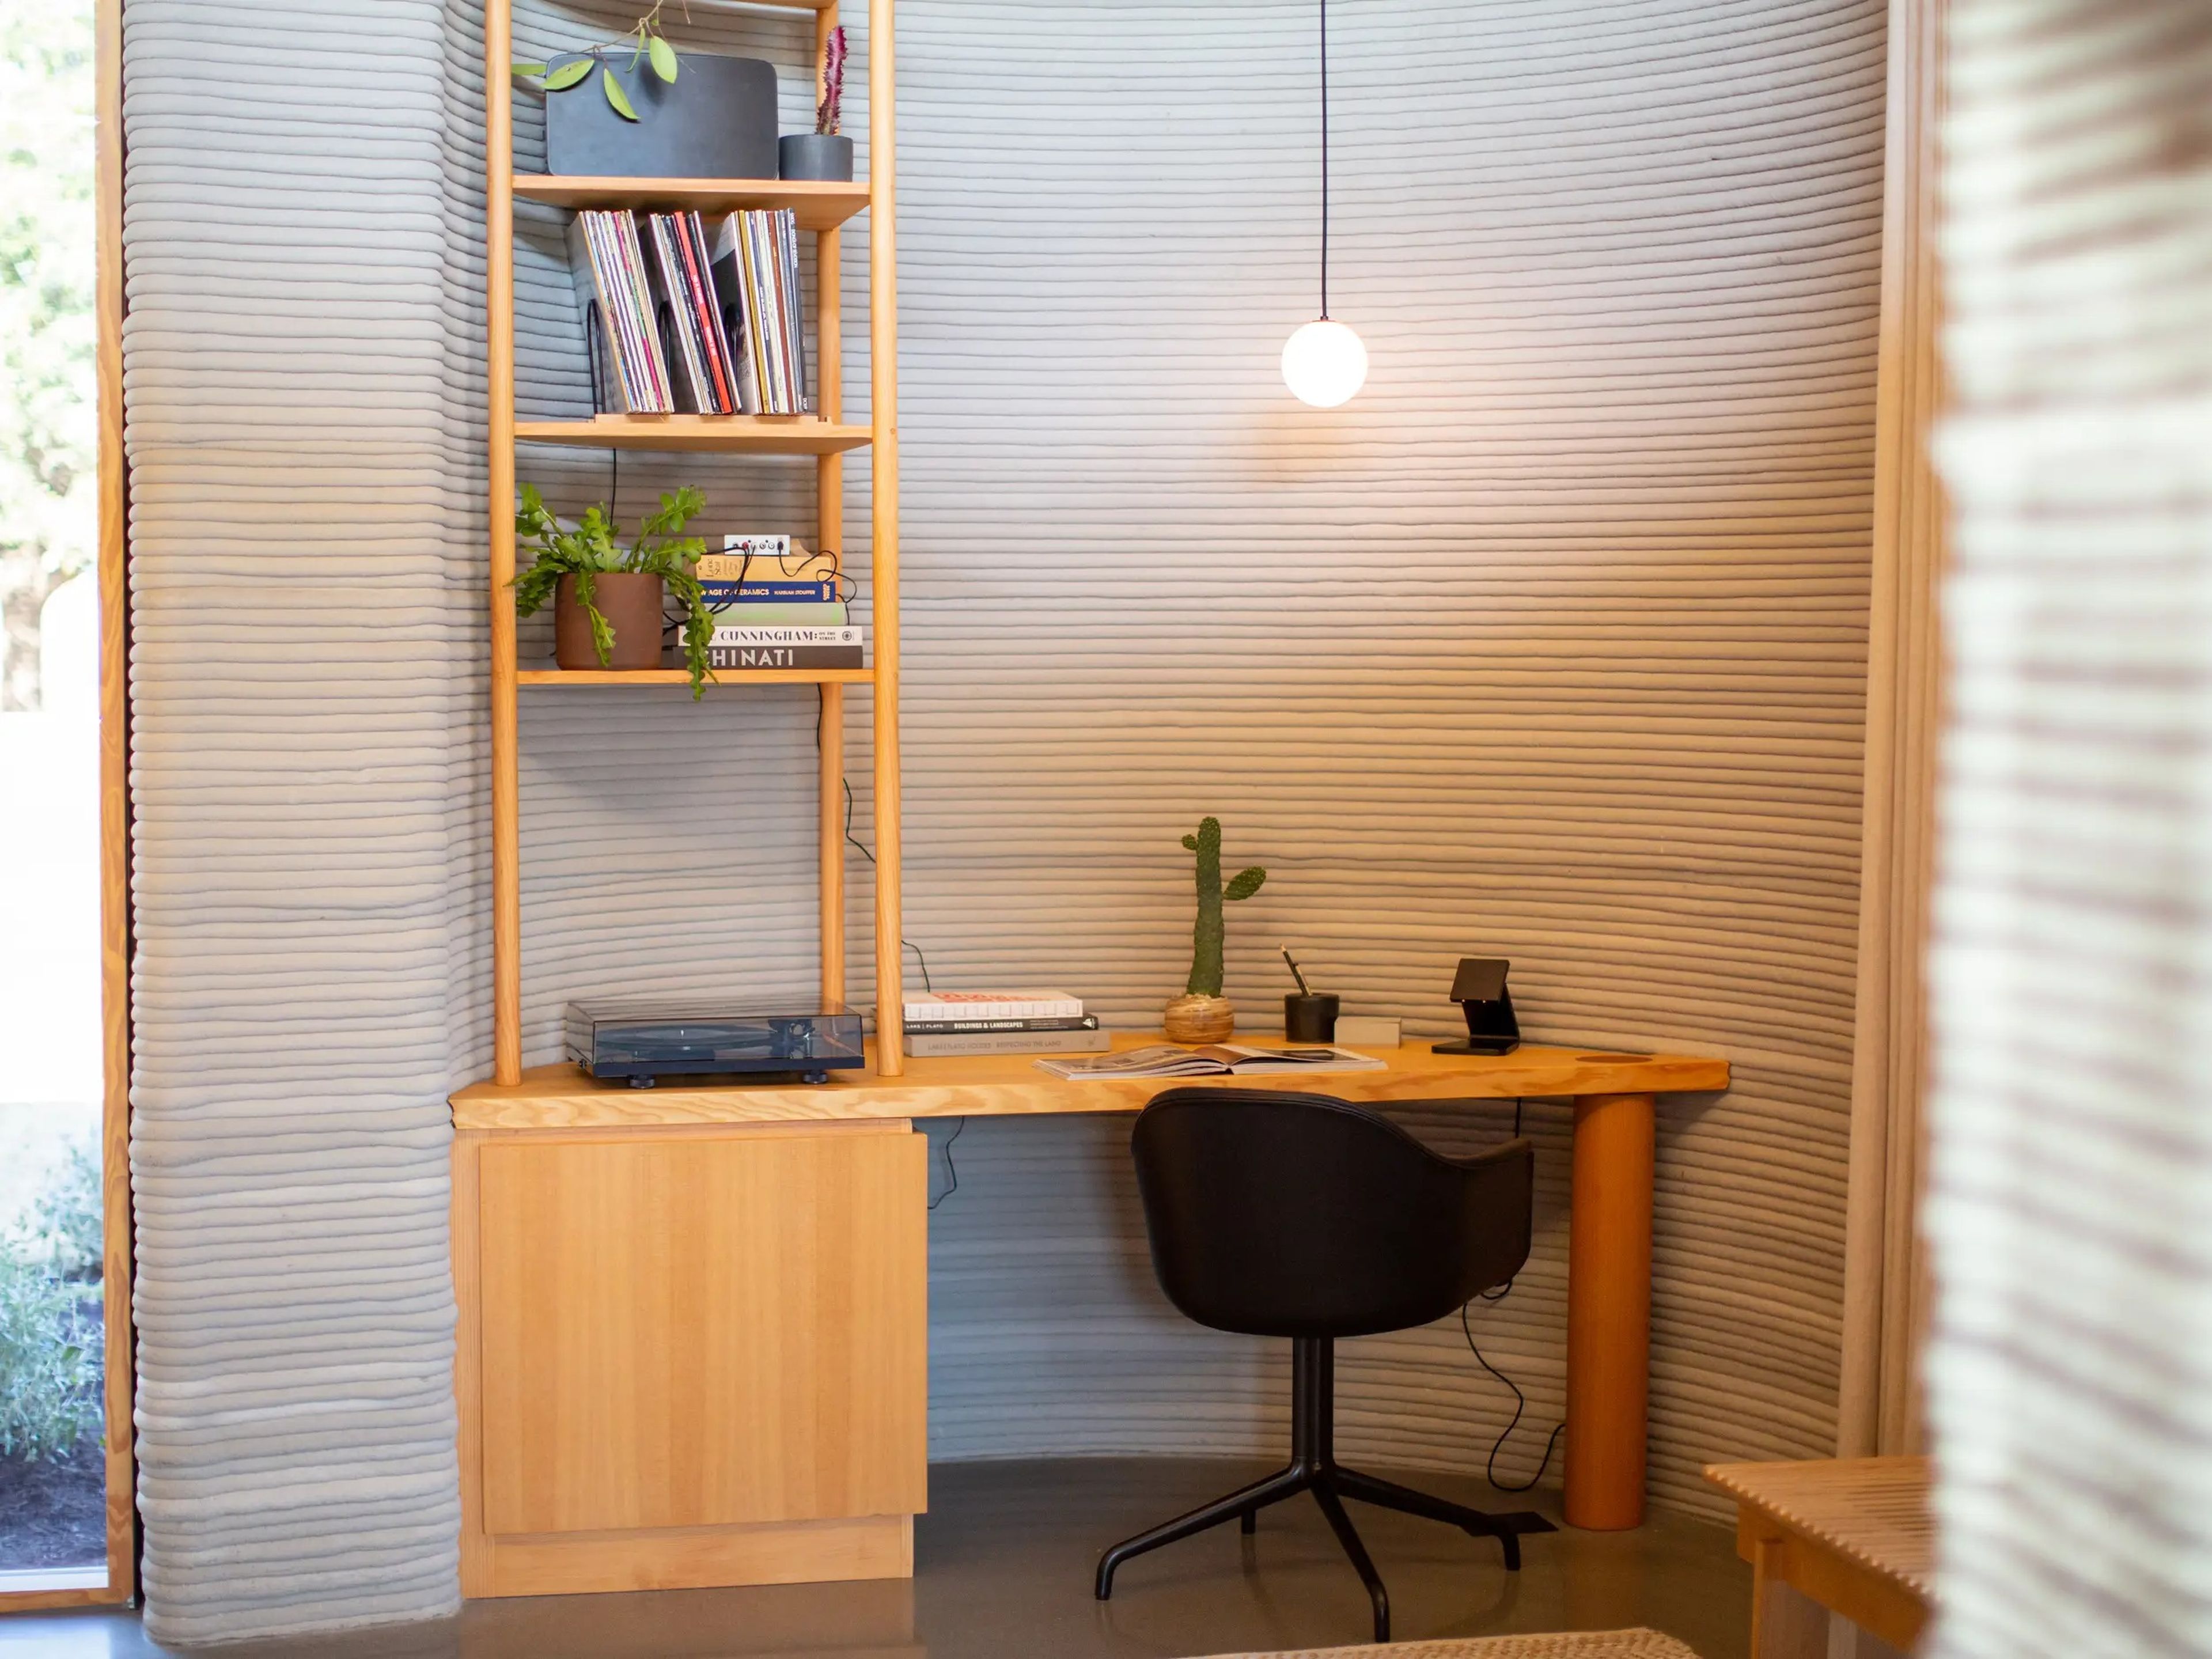 A desk in front of a 3D printed wall surrounded by windows.